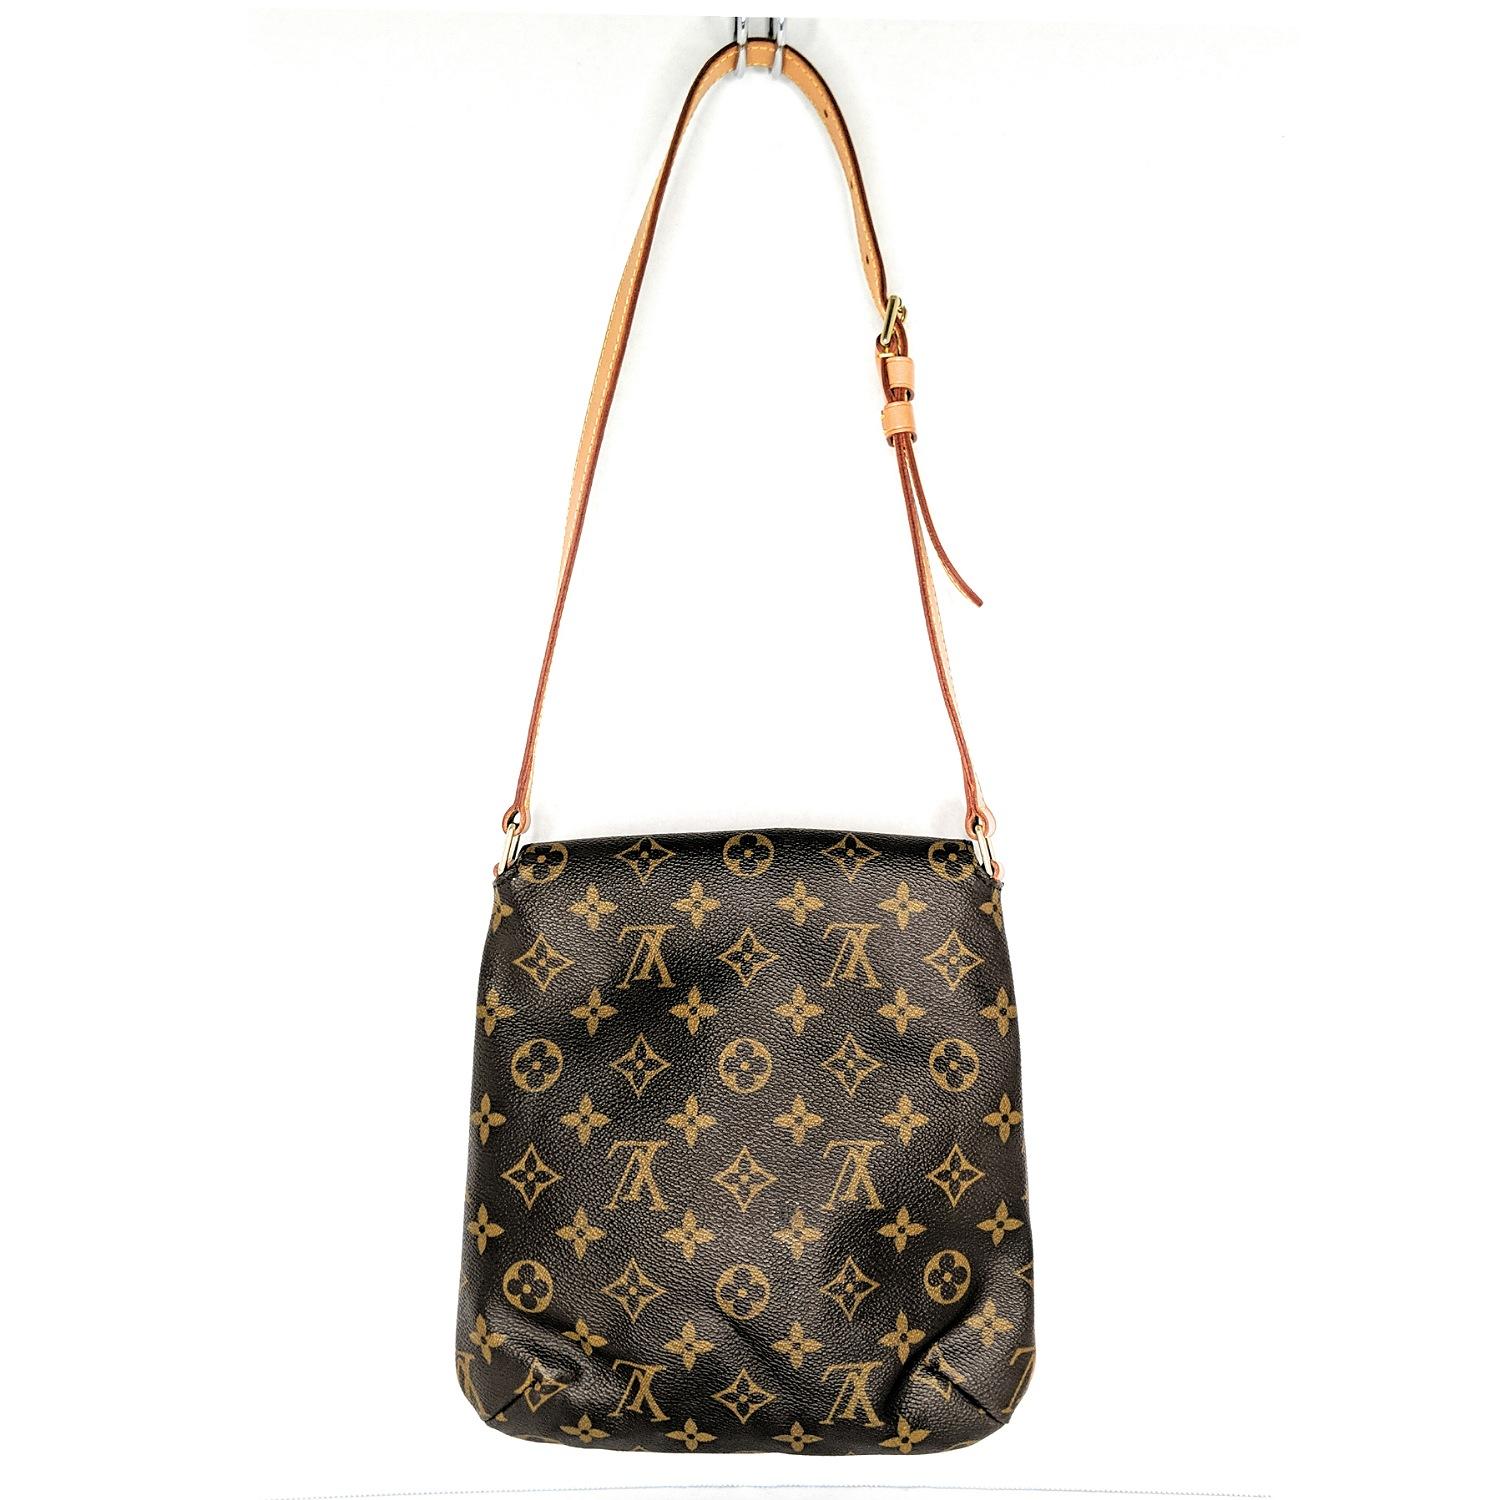 The Louis Vuitton Monogram Canvas Musette Tango bag is an elegant and sleek looking bag. It comes with a versatile adjustable leather shoulder strap and a flap top closure that tucks comfortably under the arm. Perfect if you're looking for something